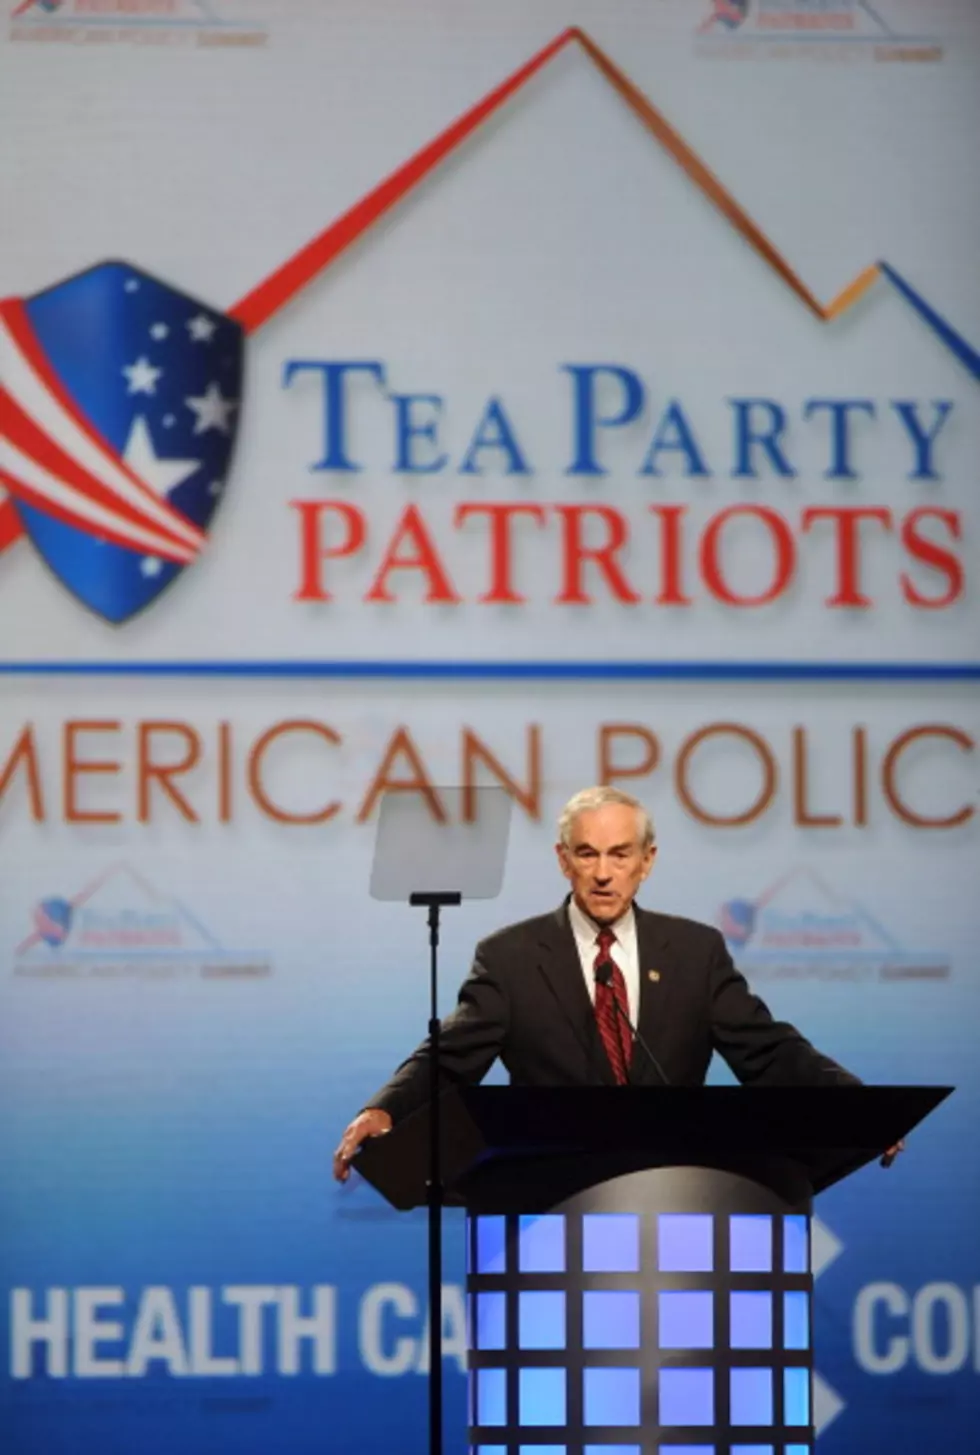 Tea Party Movement: What Are You Afraid Of?